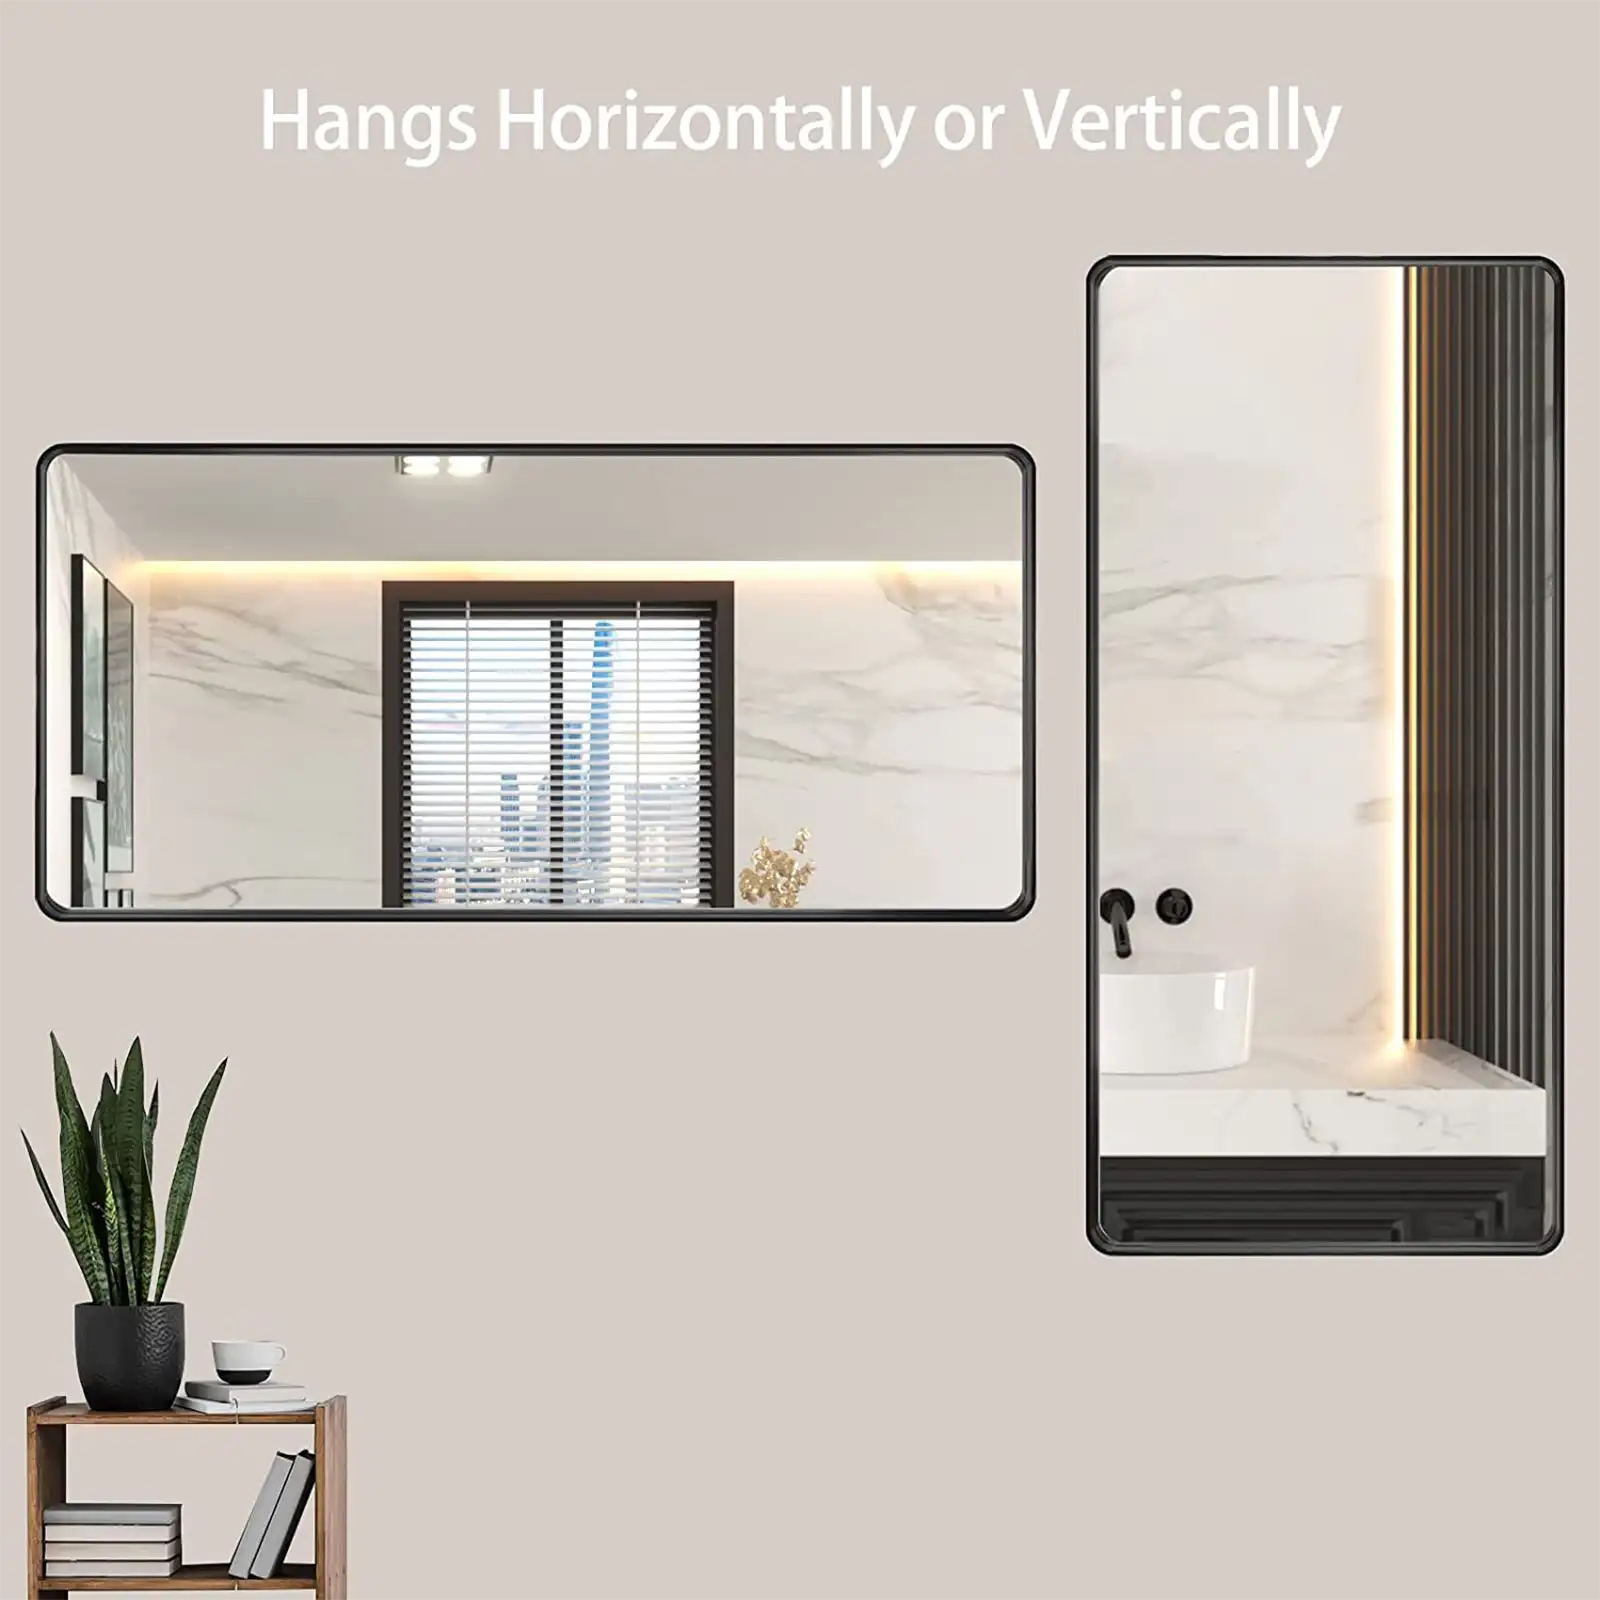 Black Metal Framed Bathroom Mirror for Wall, Matte Black Bathroom Vanity Mirror Farmhouse, Large Rounded Rectangle Mirror, Anti-Rust, Shatter-Proof, Hangs Horizontally or Vertically